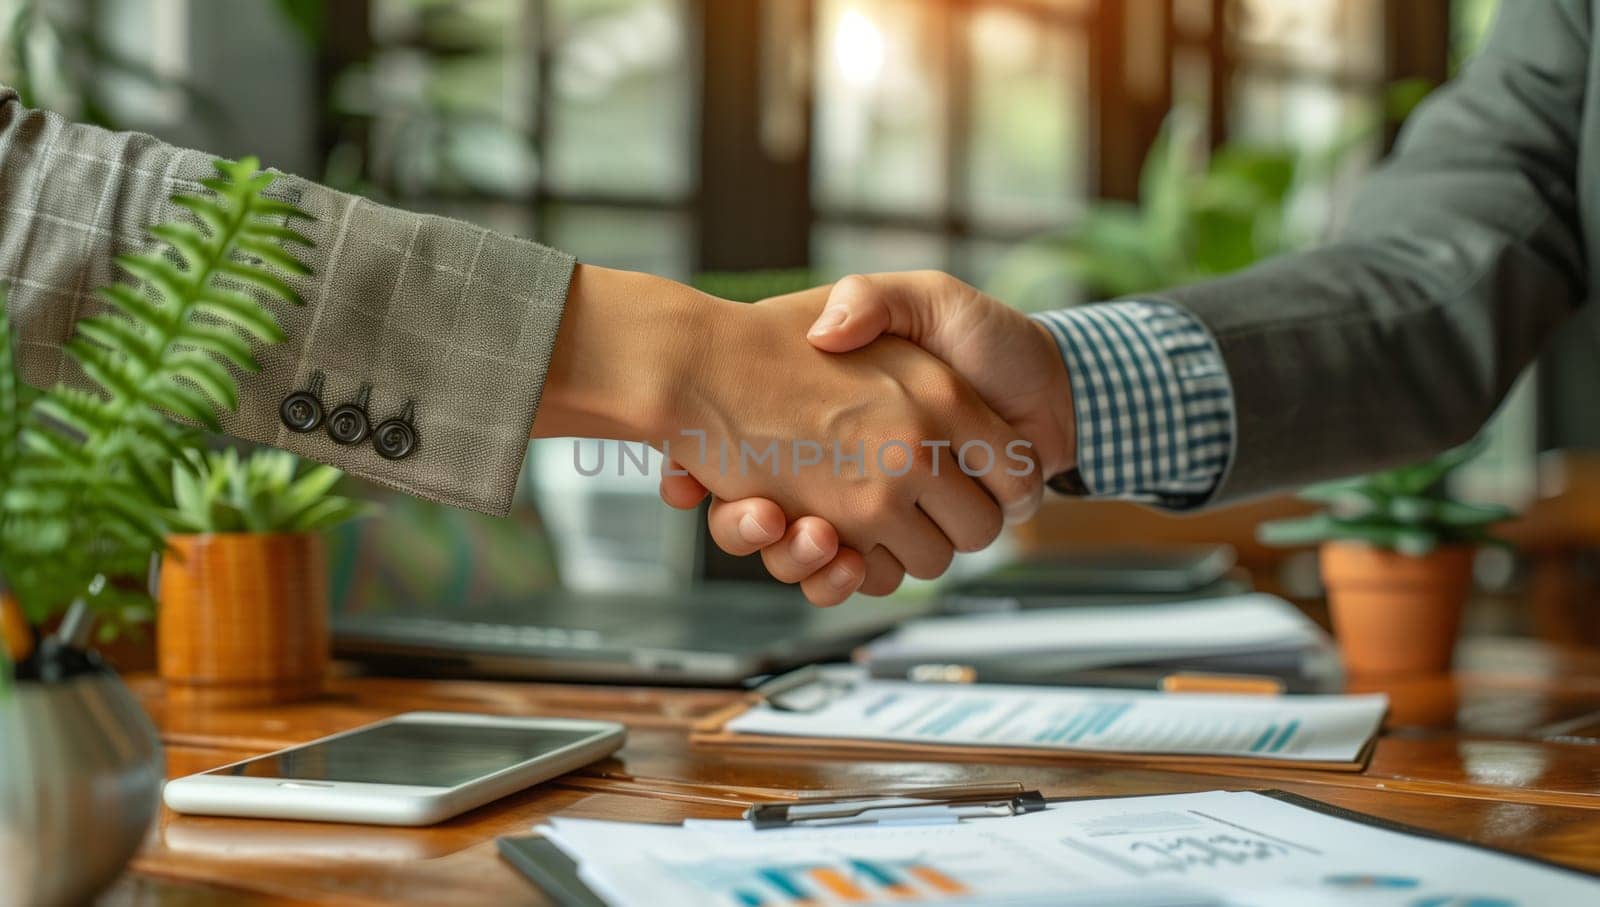 Two men exchange handshakes across a wooden table by richwolf